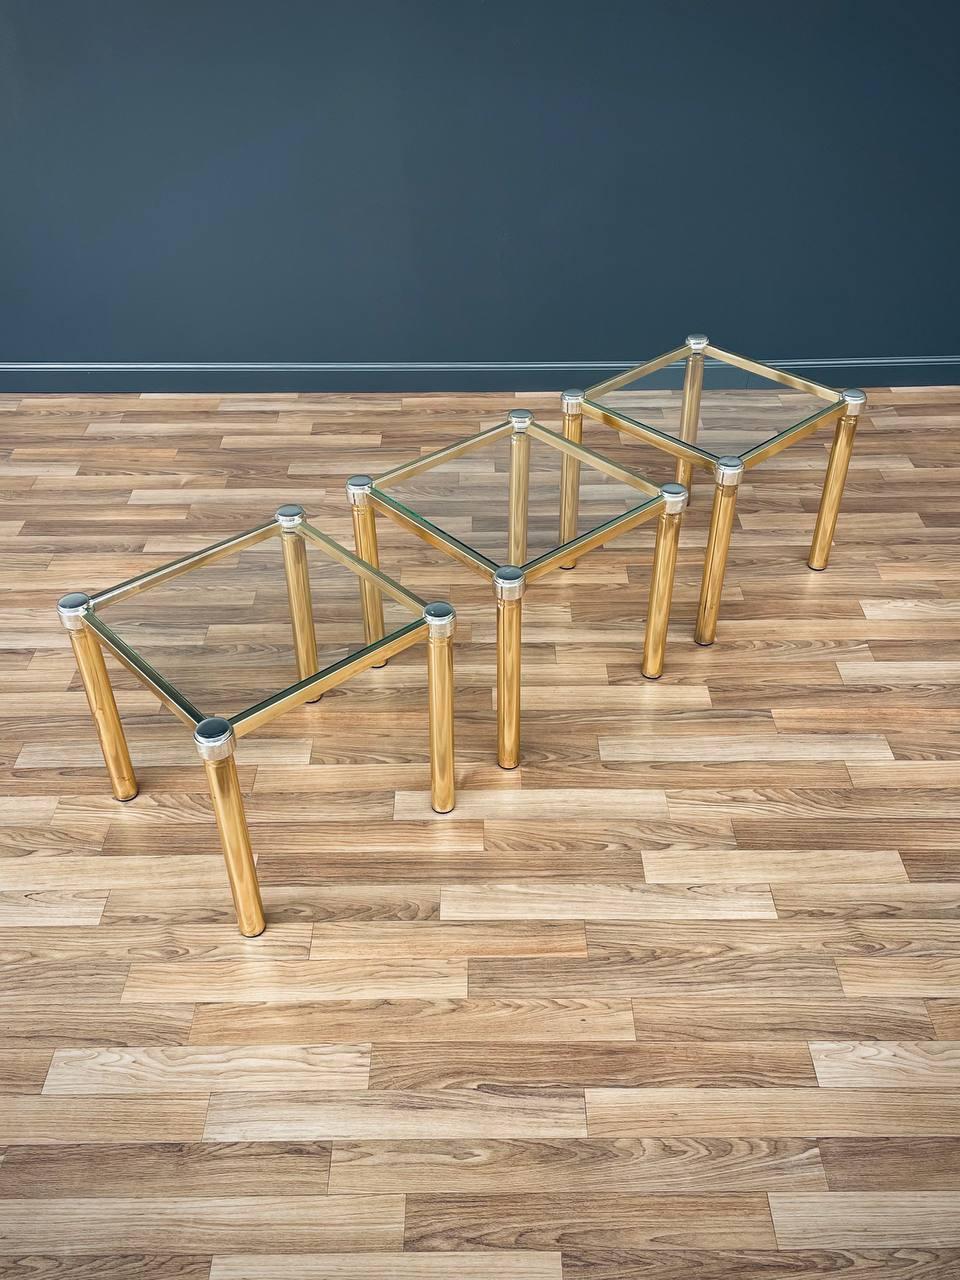 Original Vintage Condition, Brass Show Patina from Age & Use

Materials: Patinated Brass, Original Glass Tops

